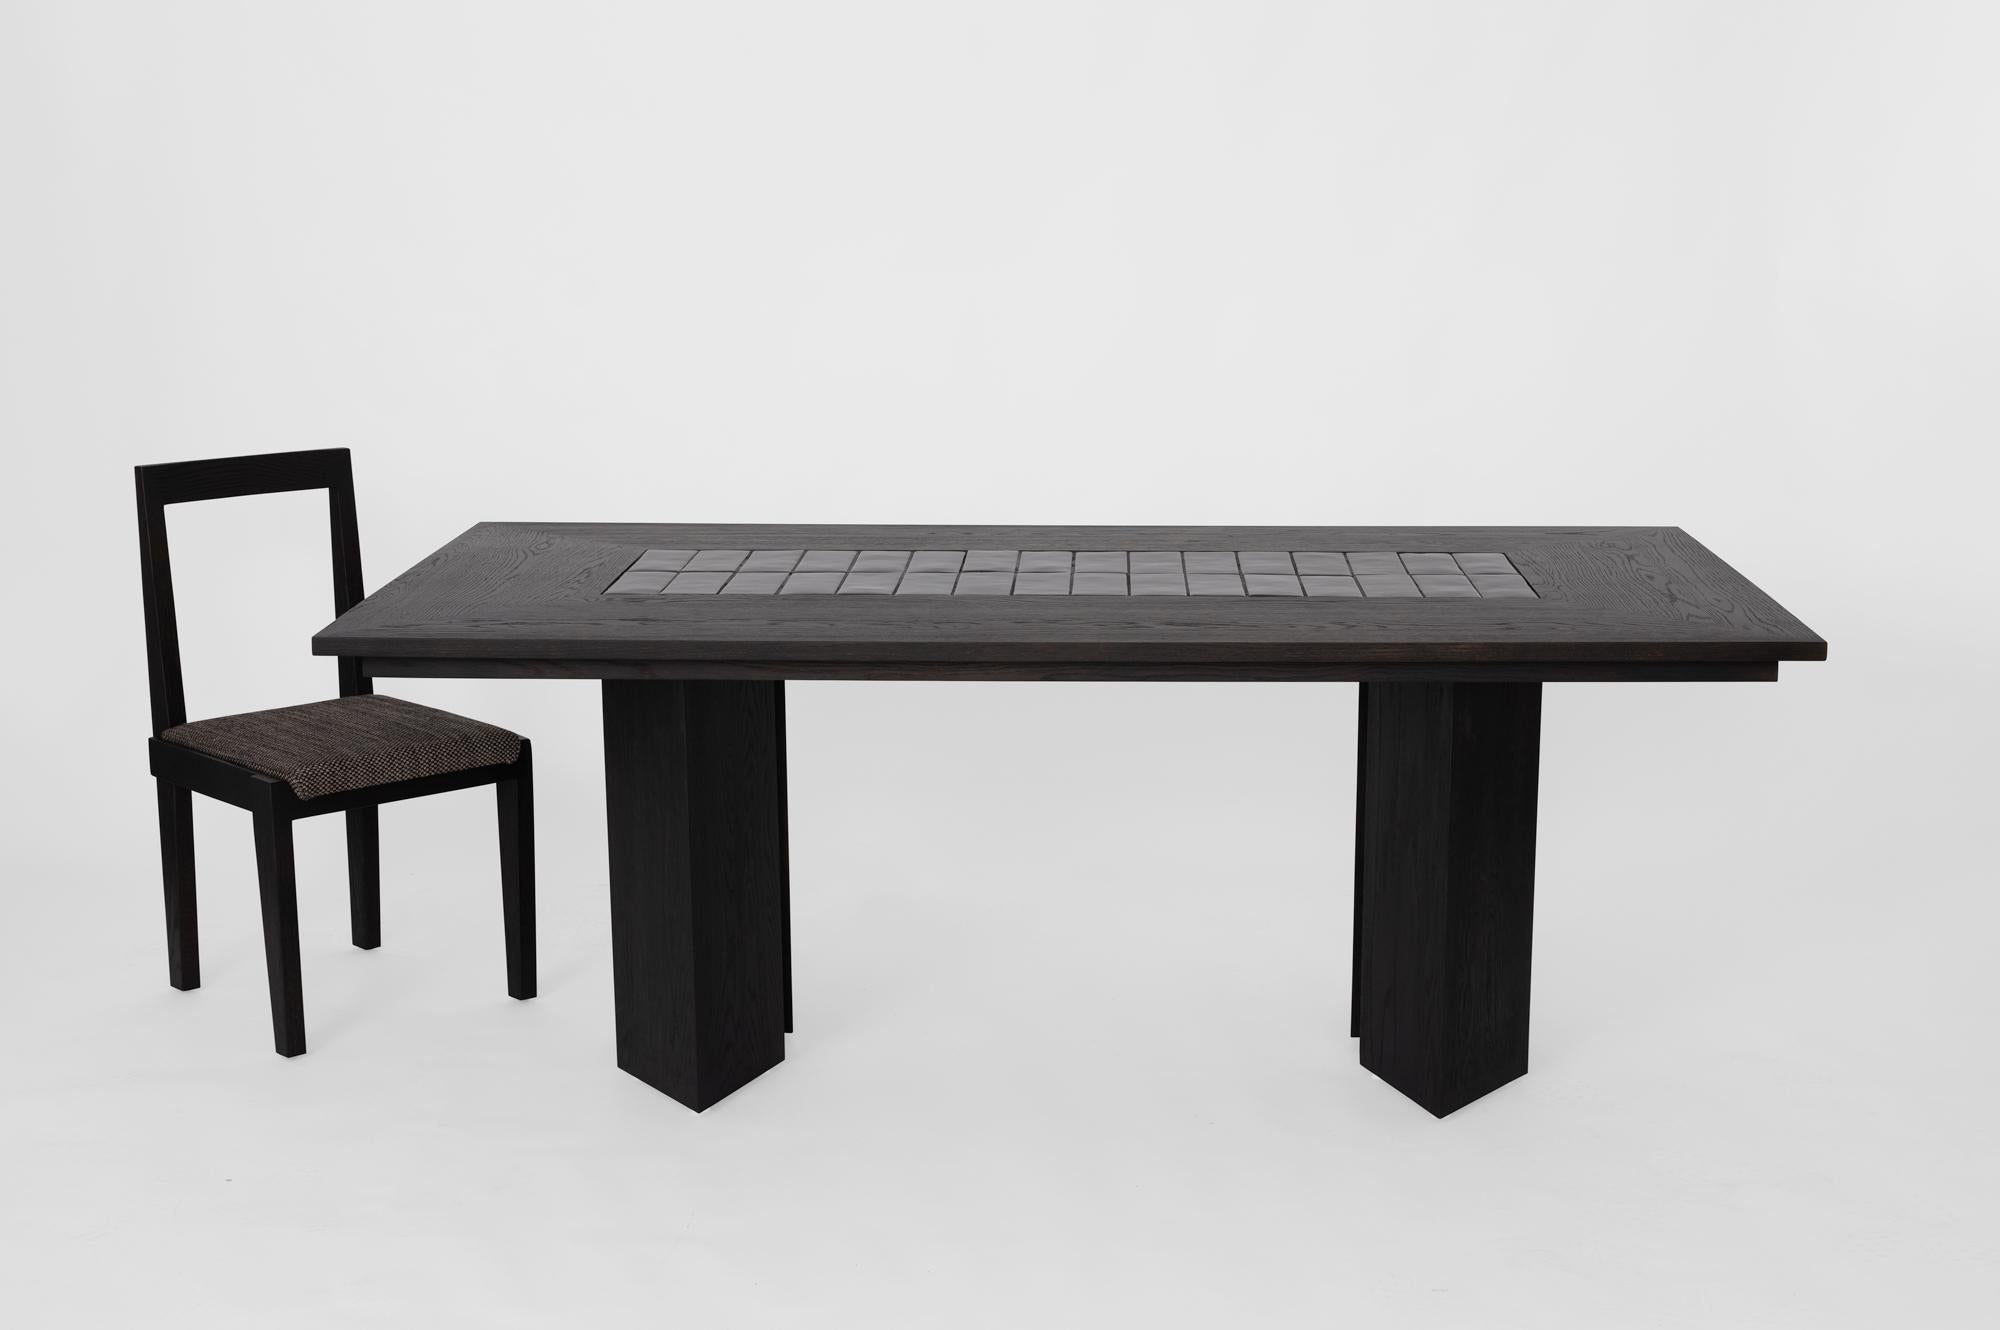 The CASA table is inspired by the distinct modernism and materials explored by Mexican architect Luis Barragan's work at the Pedregal Gardens, a dense lava field outside Mexico City which formed thousands of years ago.
The silhouette of the table